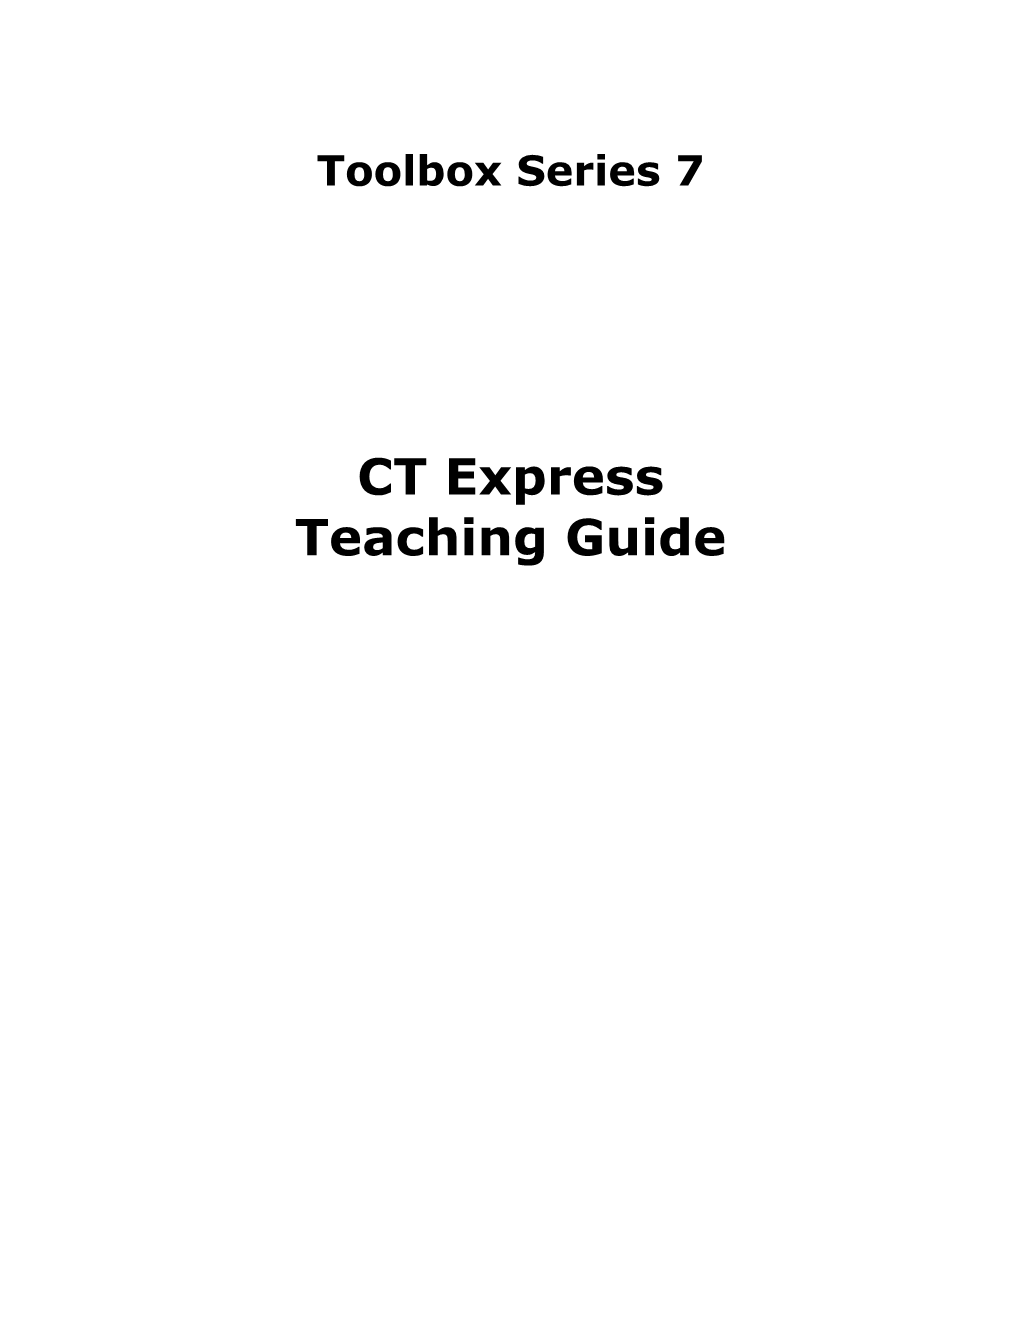 Toolbox Series 7 CT Express Teaching Guide